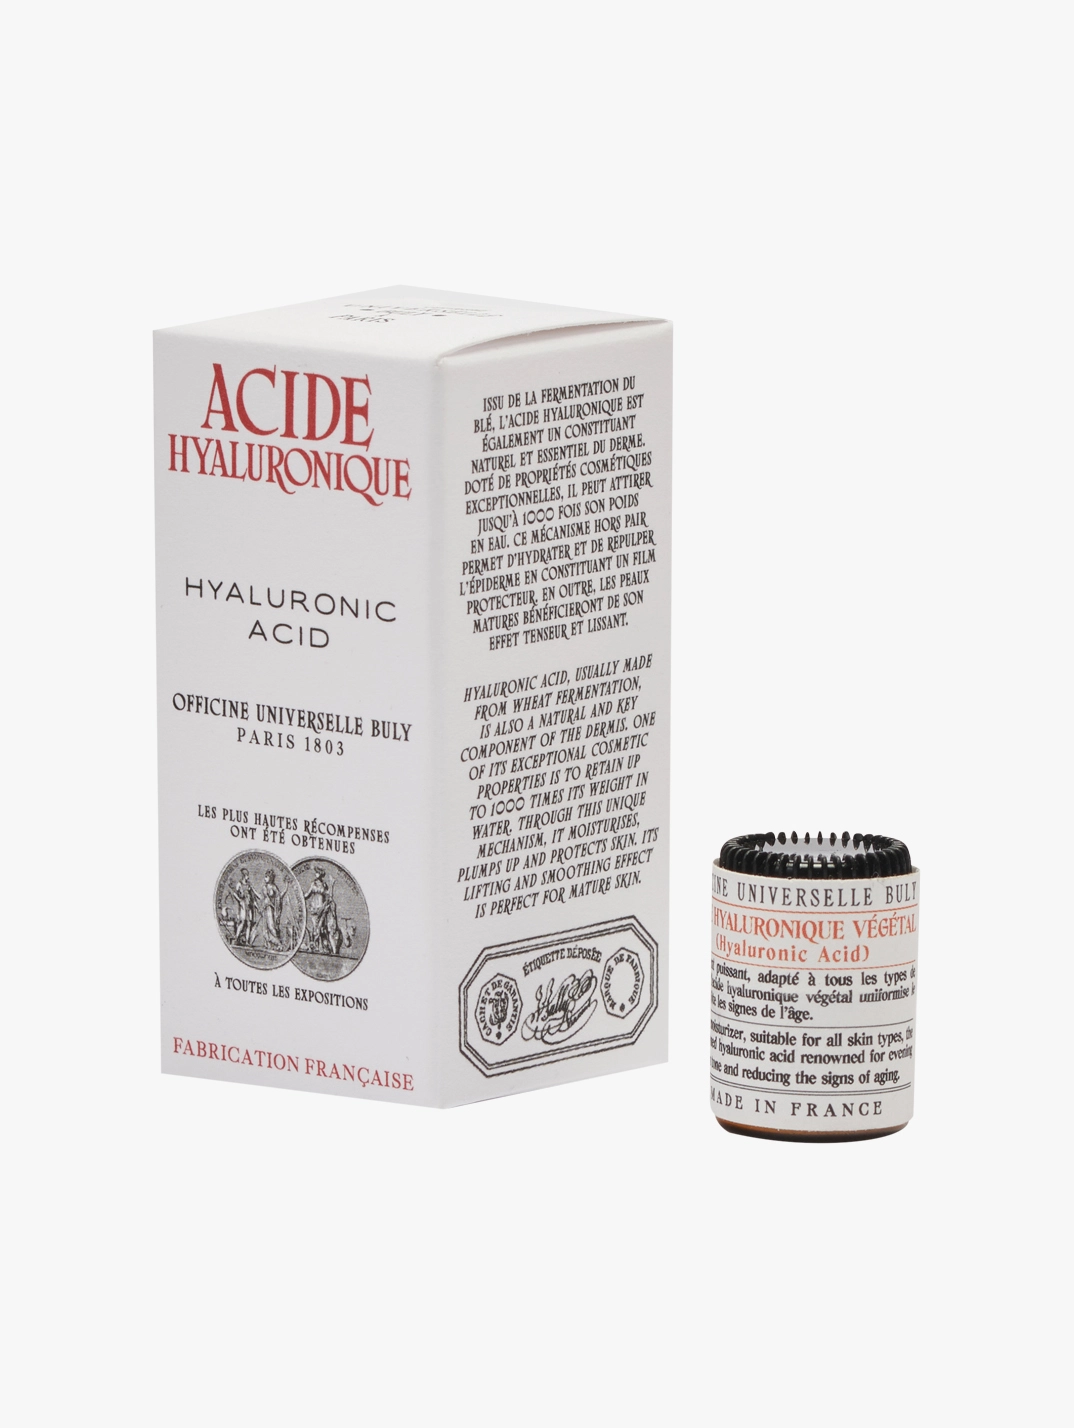 Hyaluronic acid - Officine universelle Buly